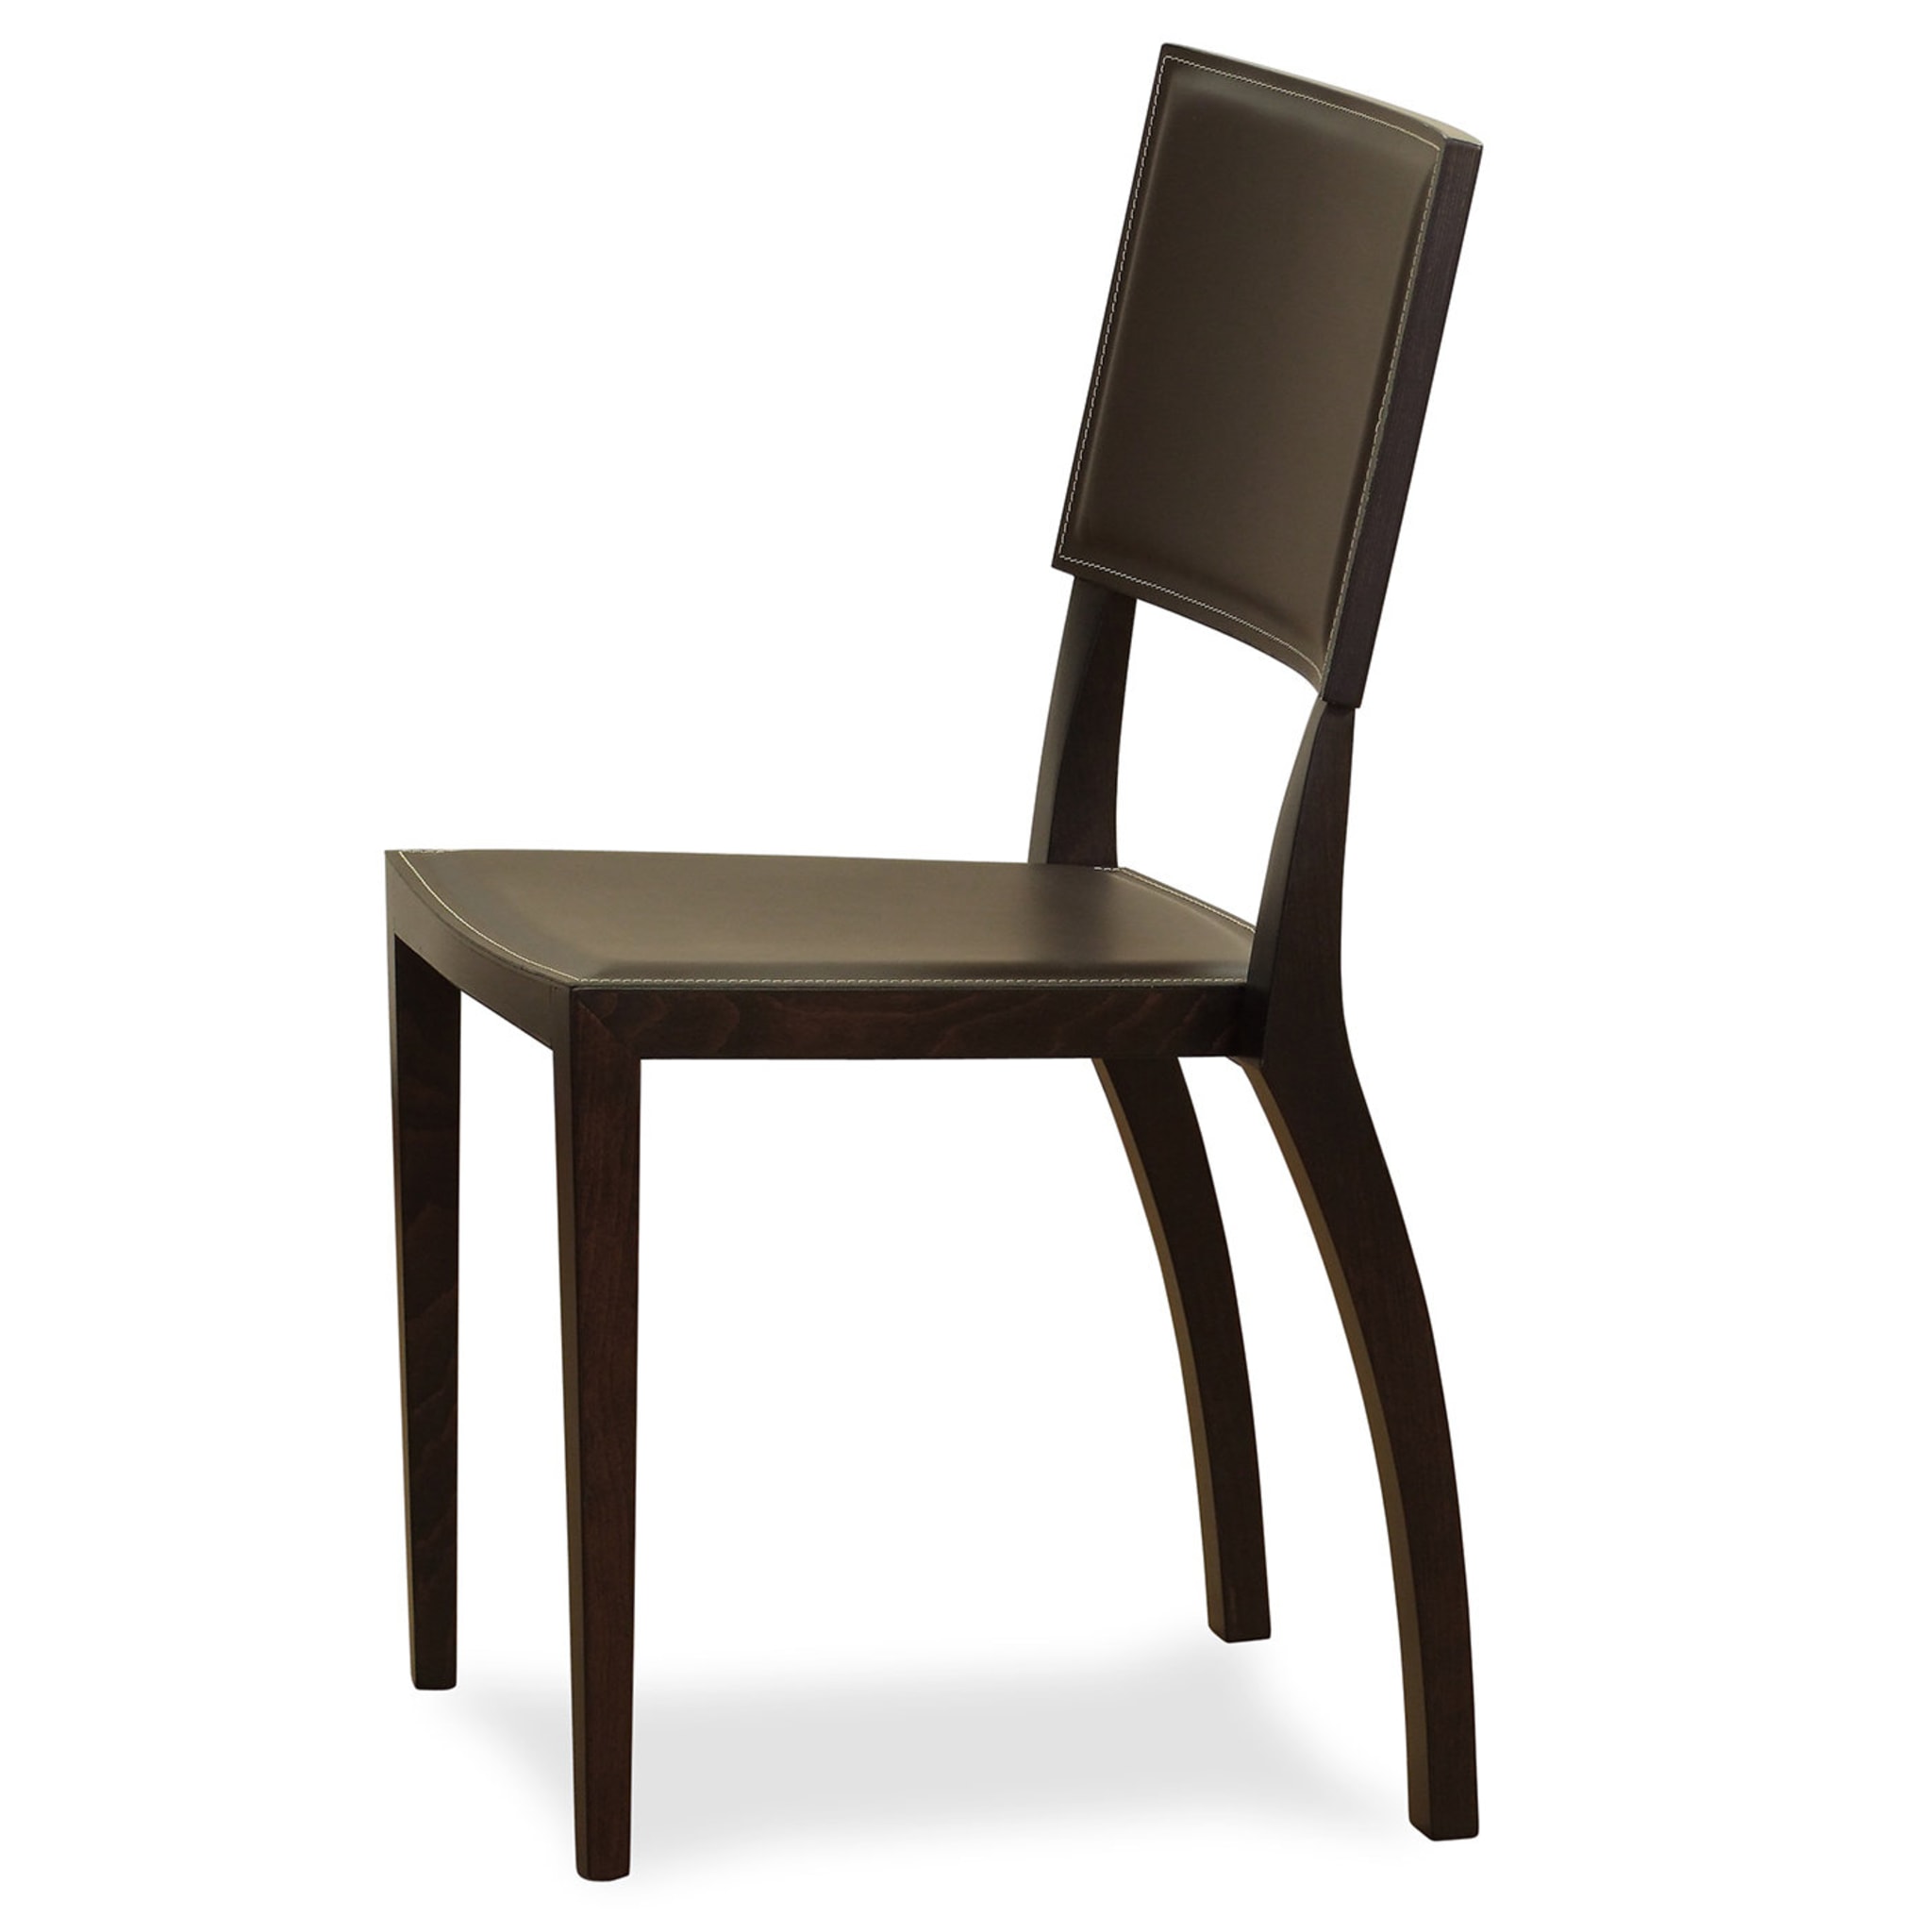 911BPI Set of 2 Chairs - Alternative view 2